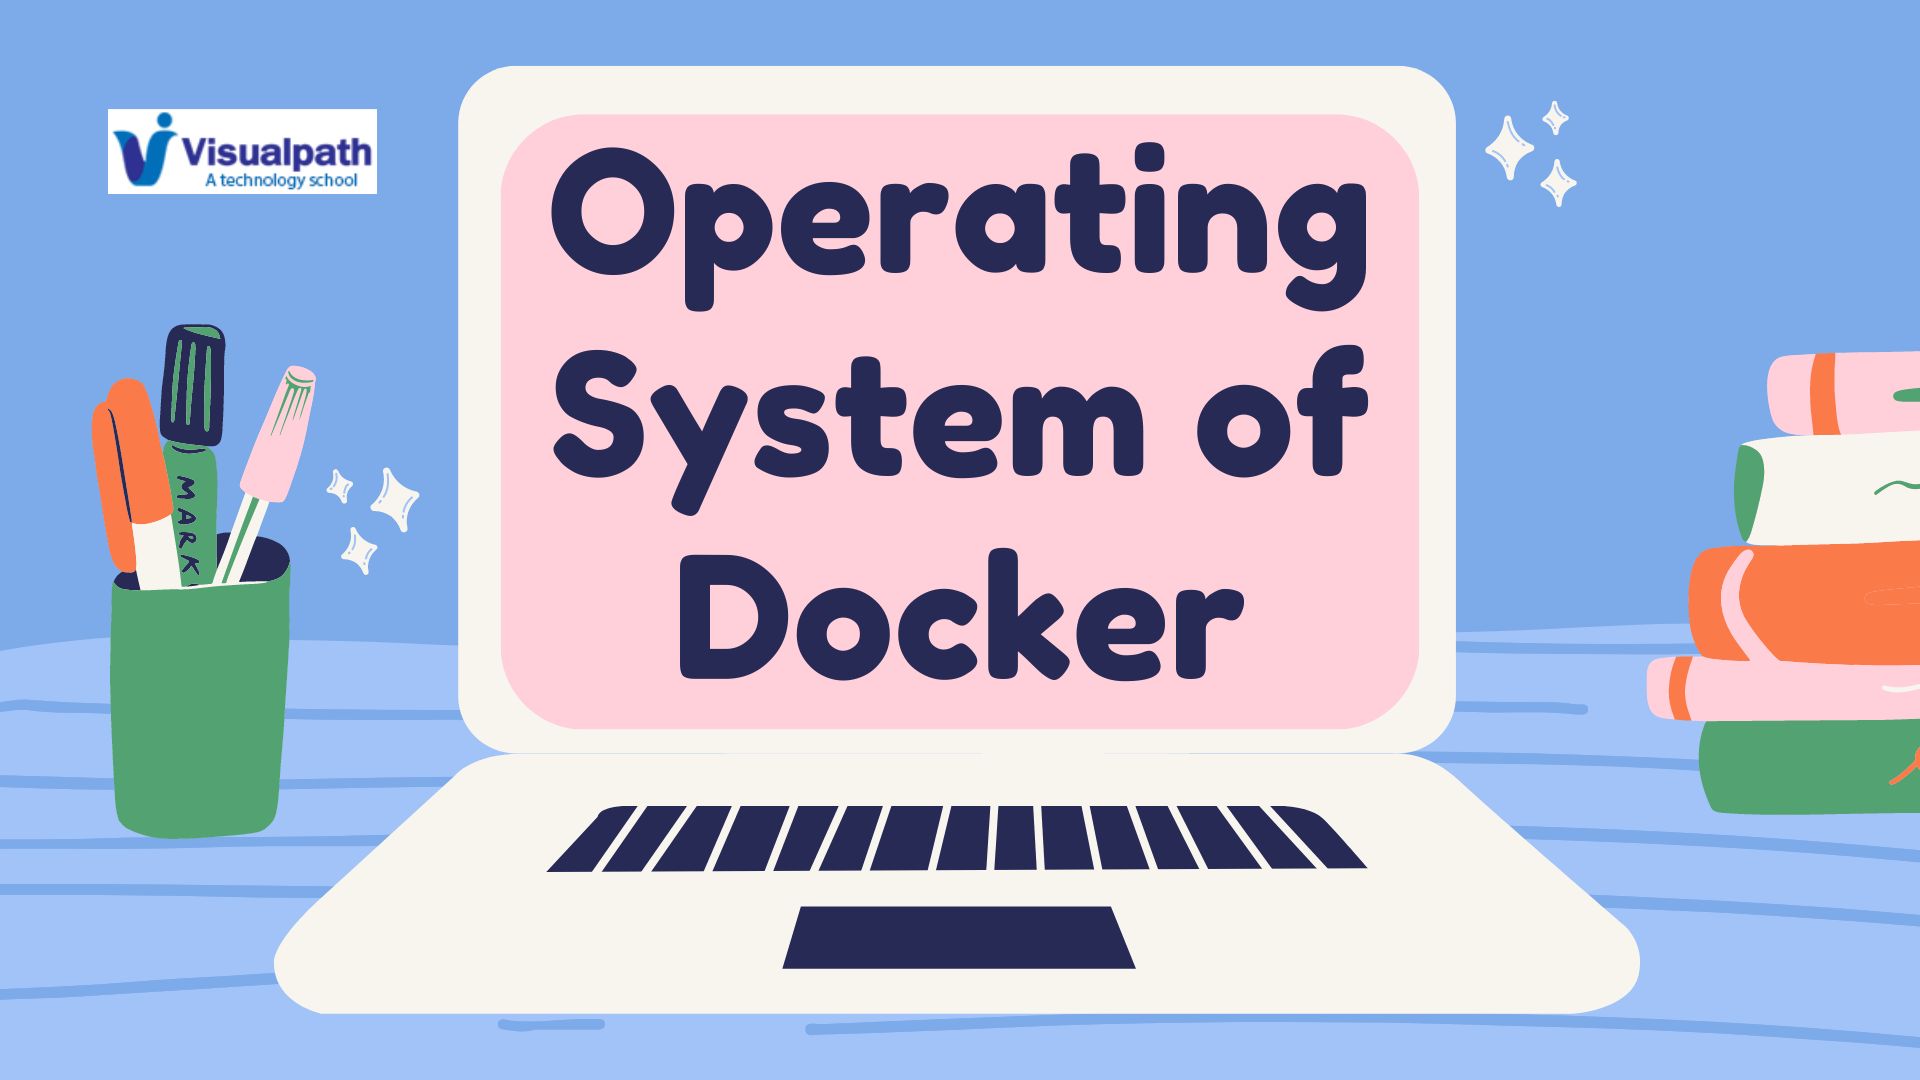 What is the underlying operating system of Docker?